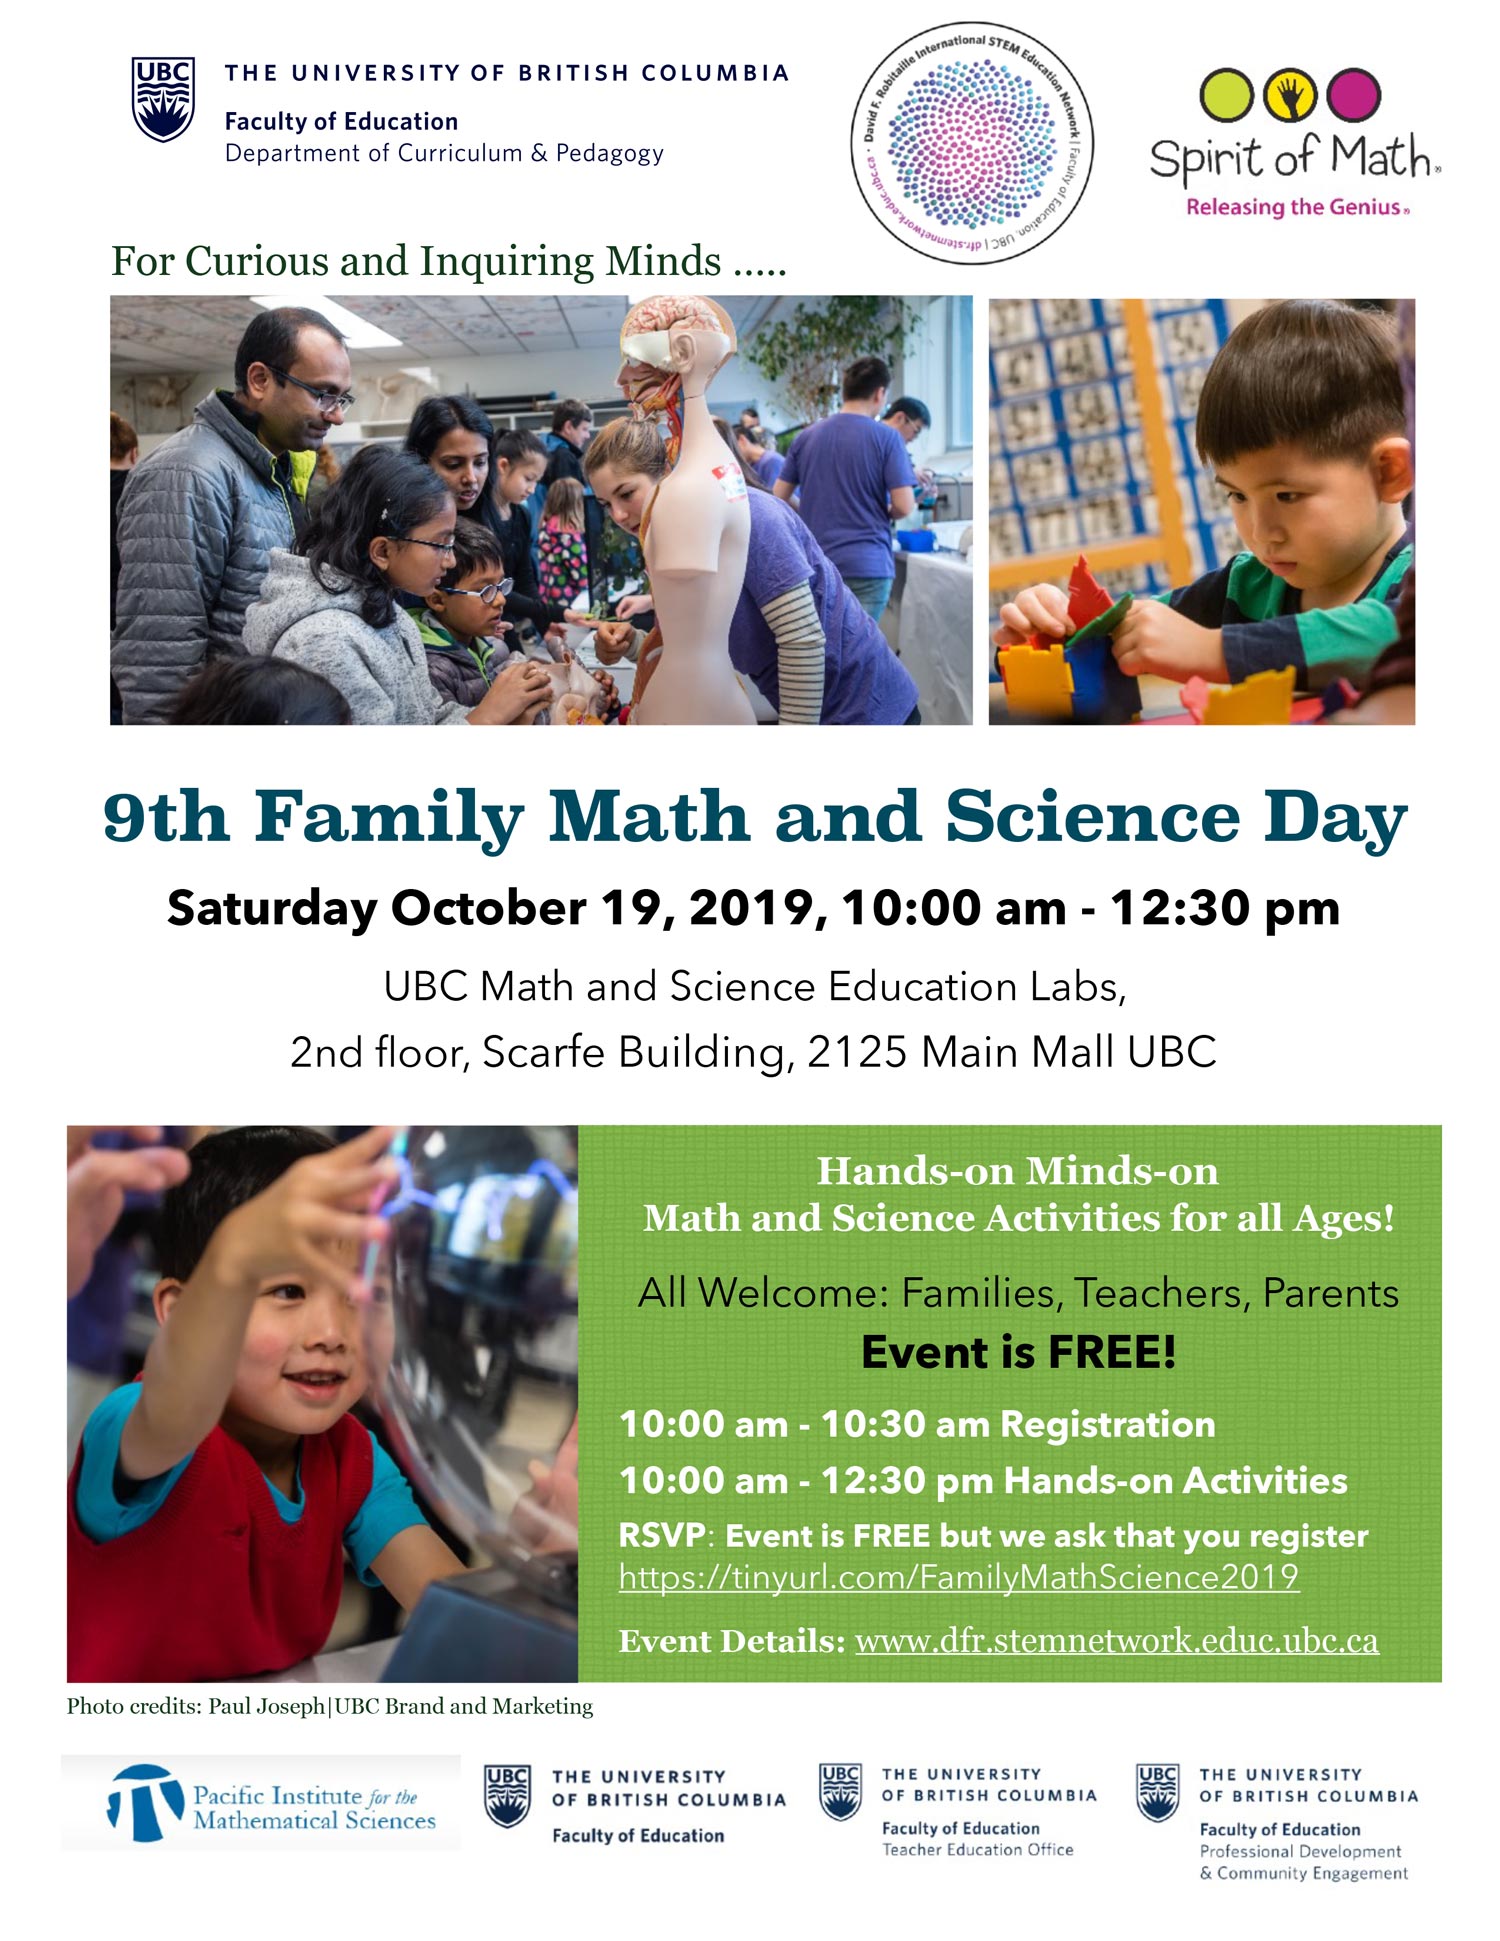 Family Math and Science Day 2019